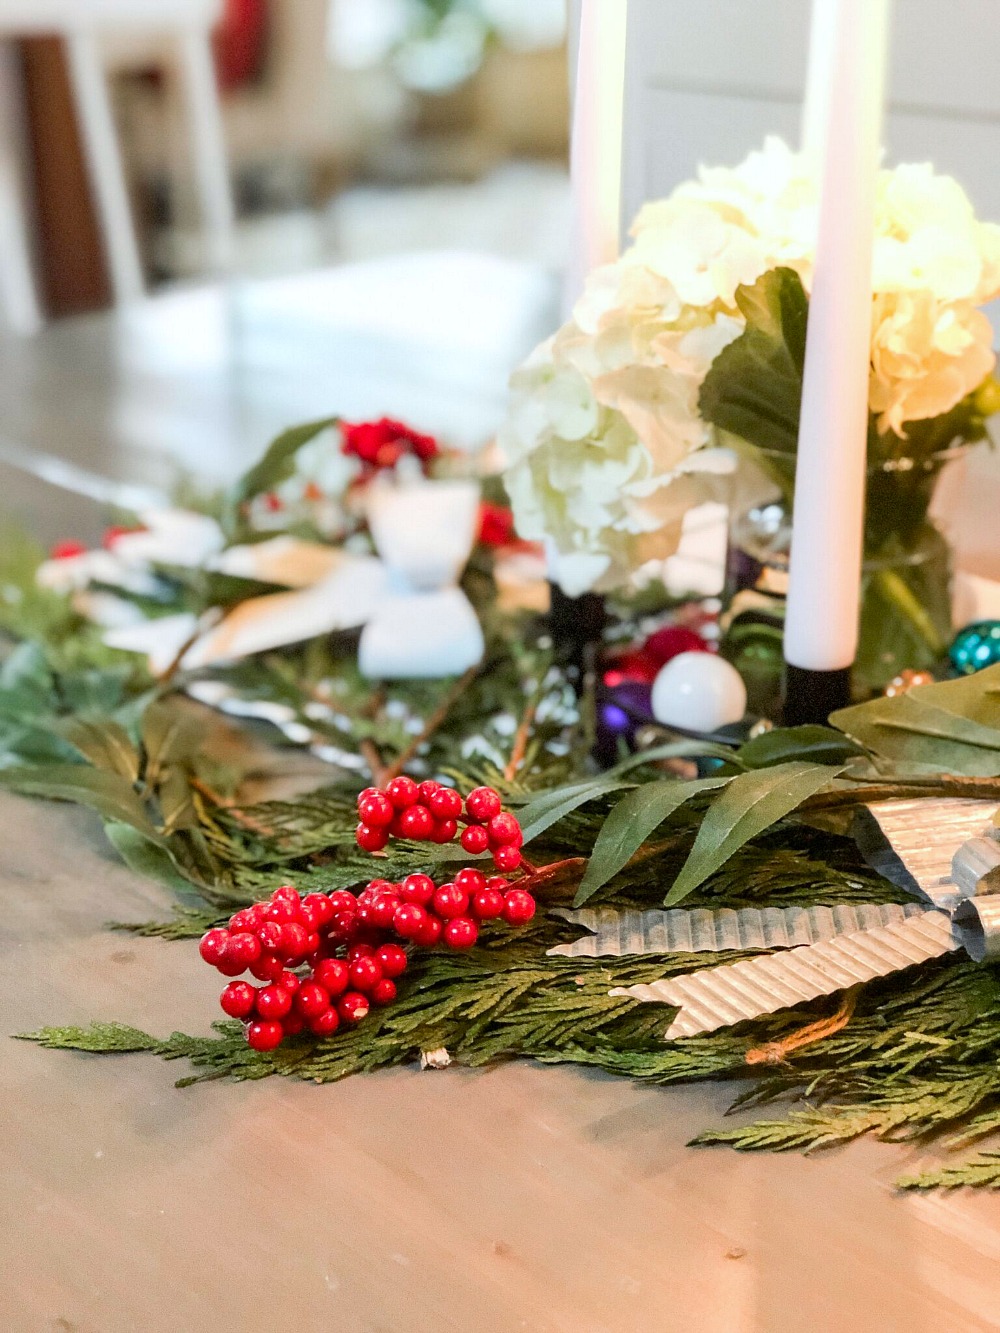 Dollar Spot Modern Farmhouse Holiday Centerpiece. How to make an easy Christmas centerpiece with a few items from Target's Dollar Spot.